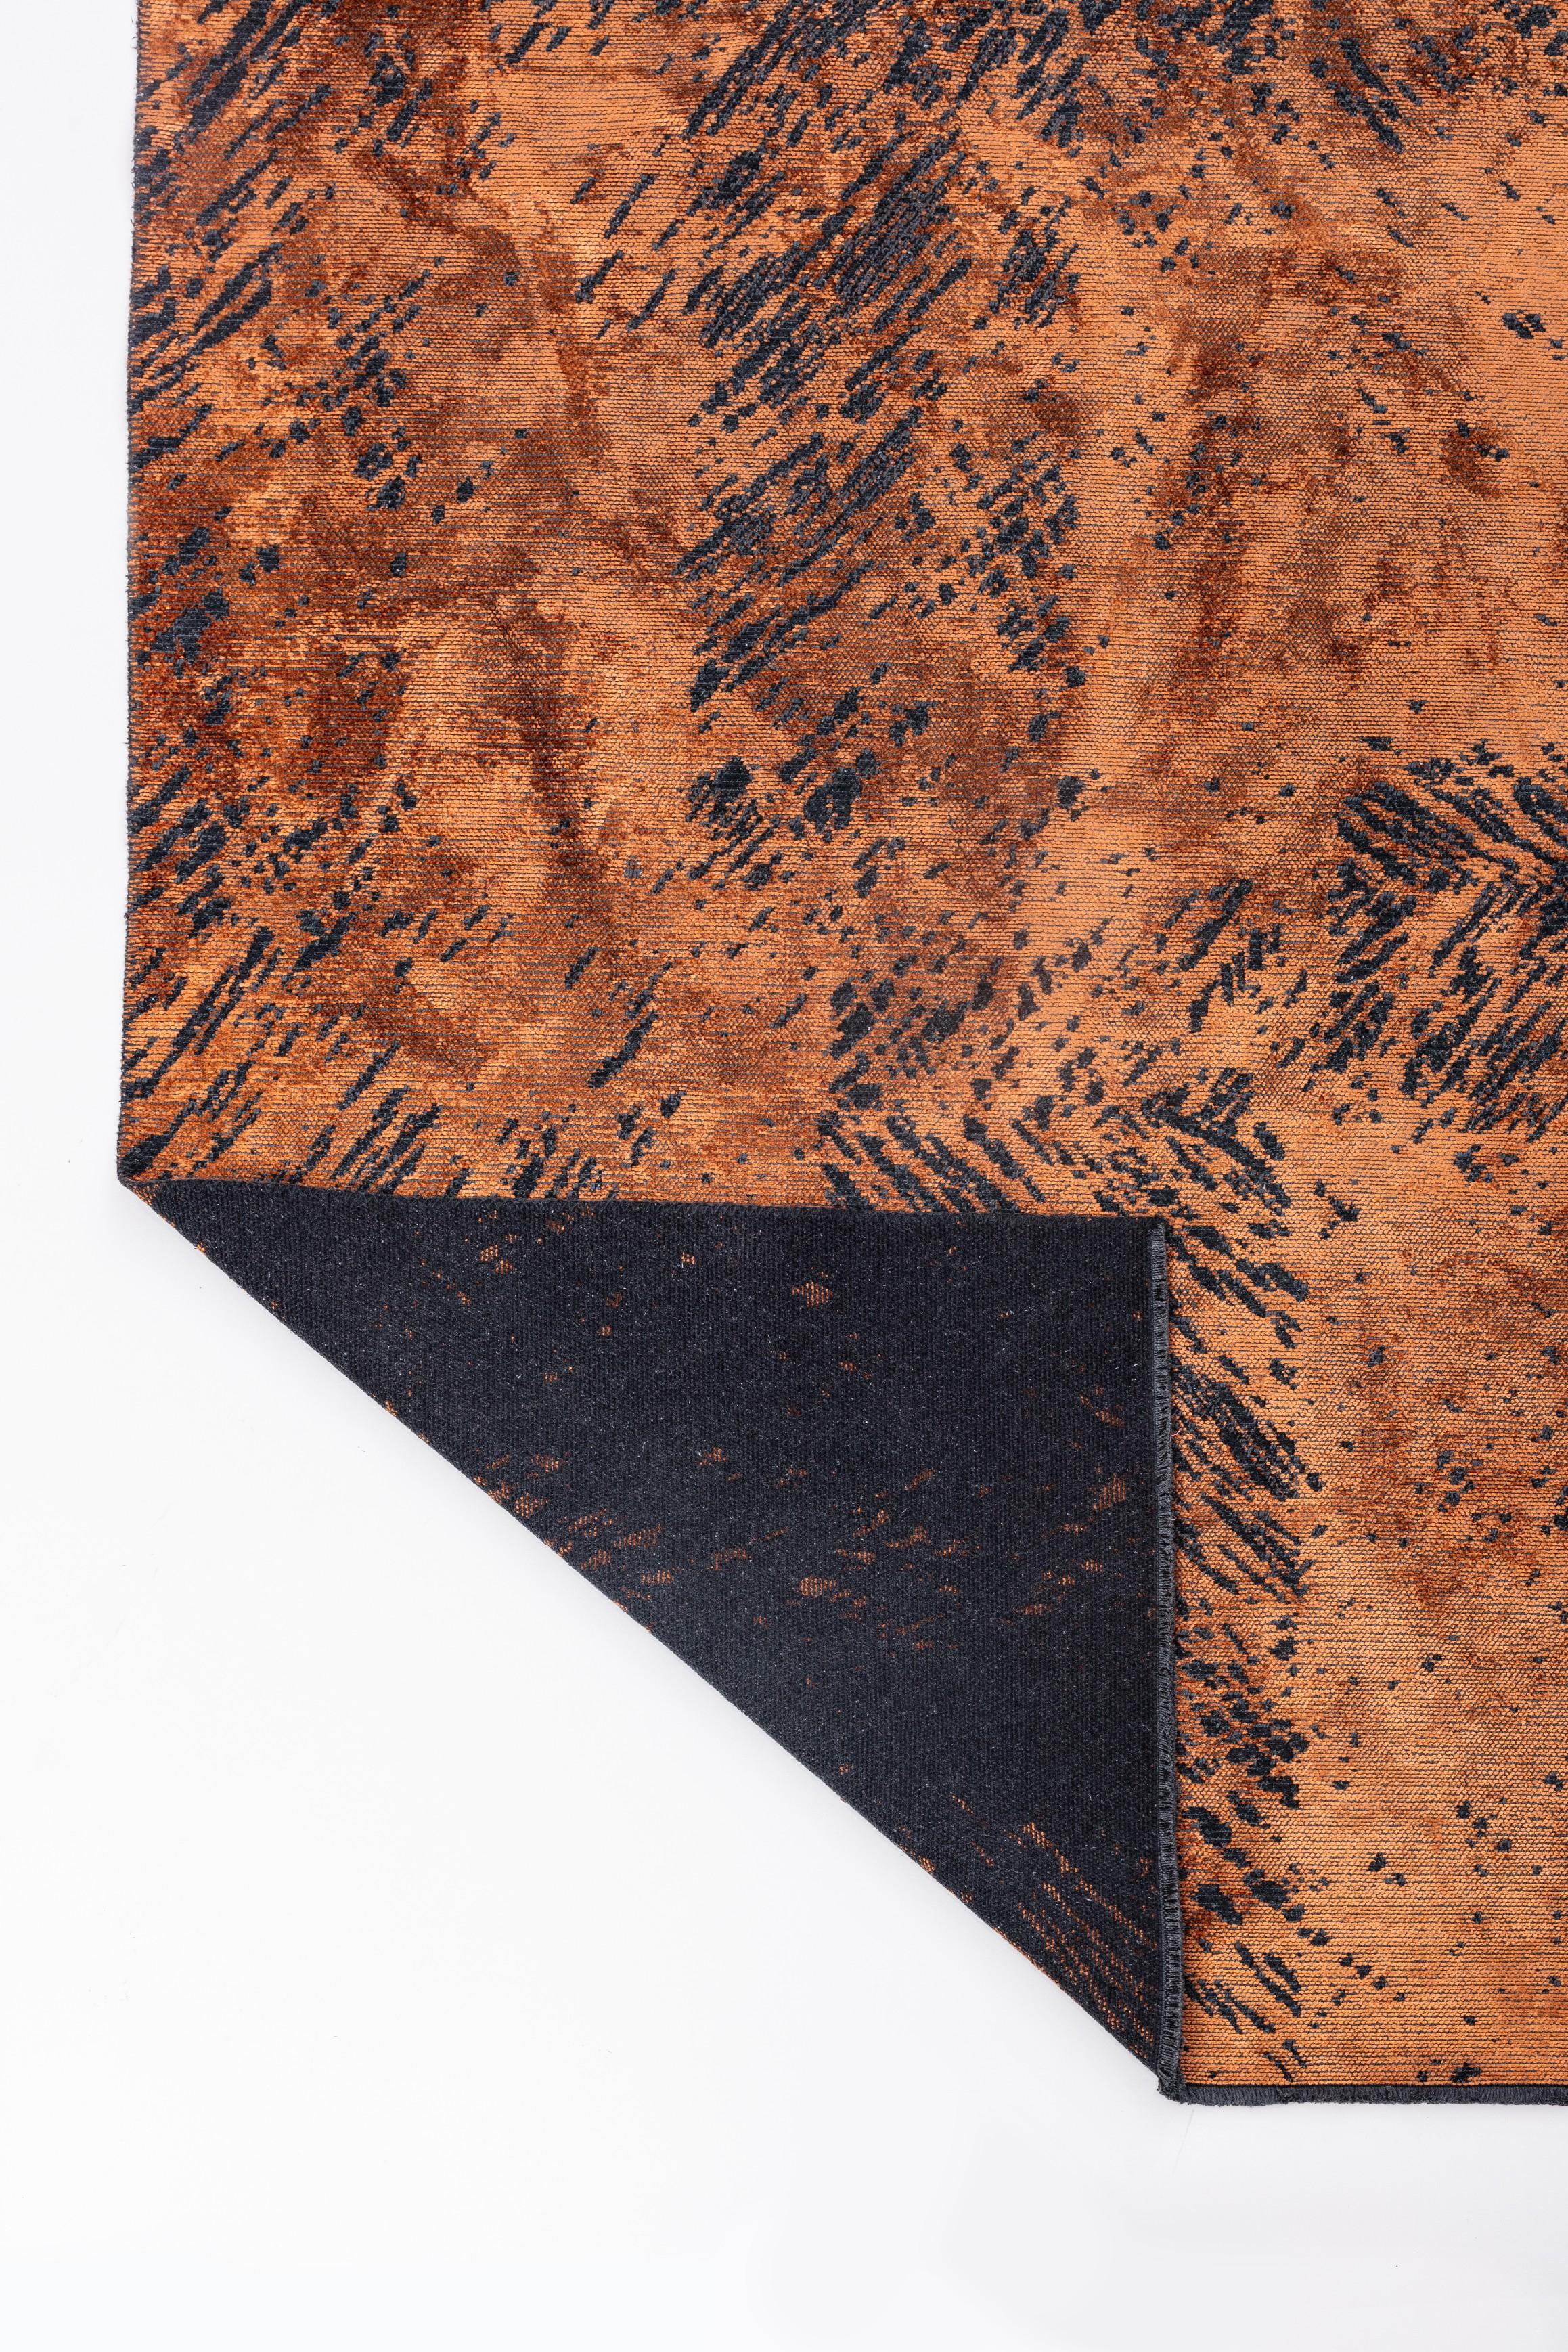 For Sale:  (Orange) Modern Abstract Luxury Area Rug 3